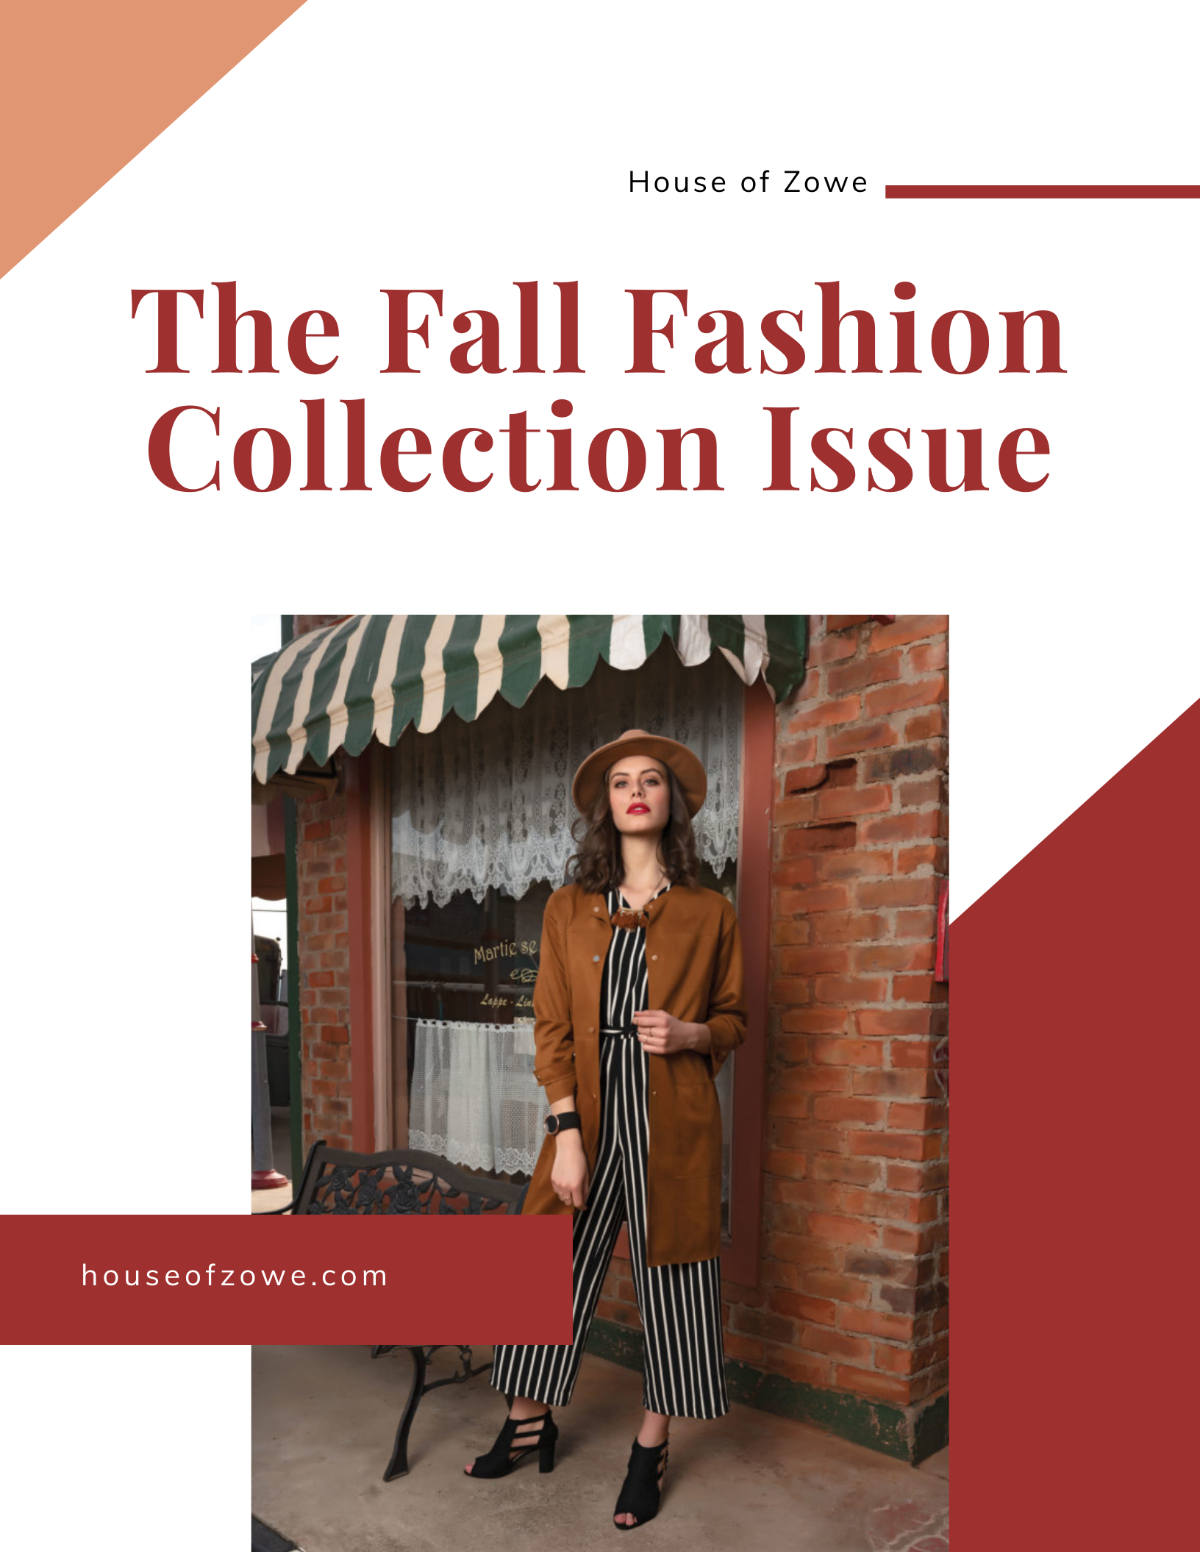 New Autumn/Fall Collection Flyer